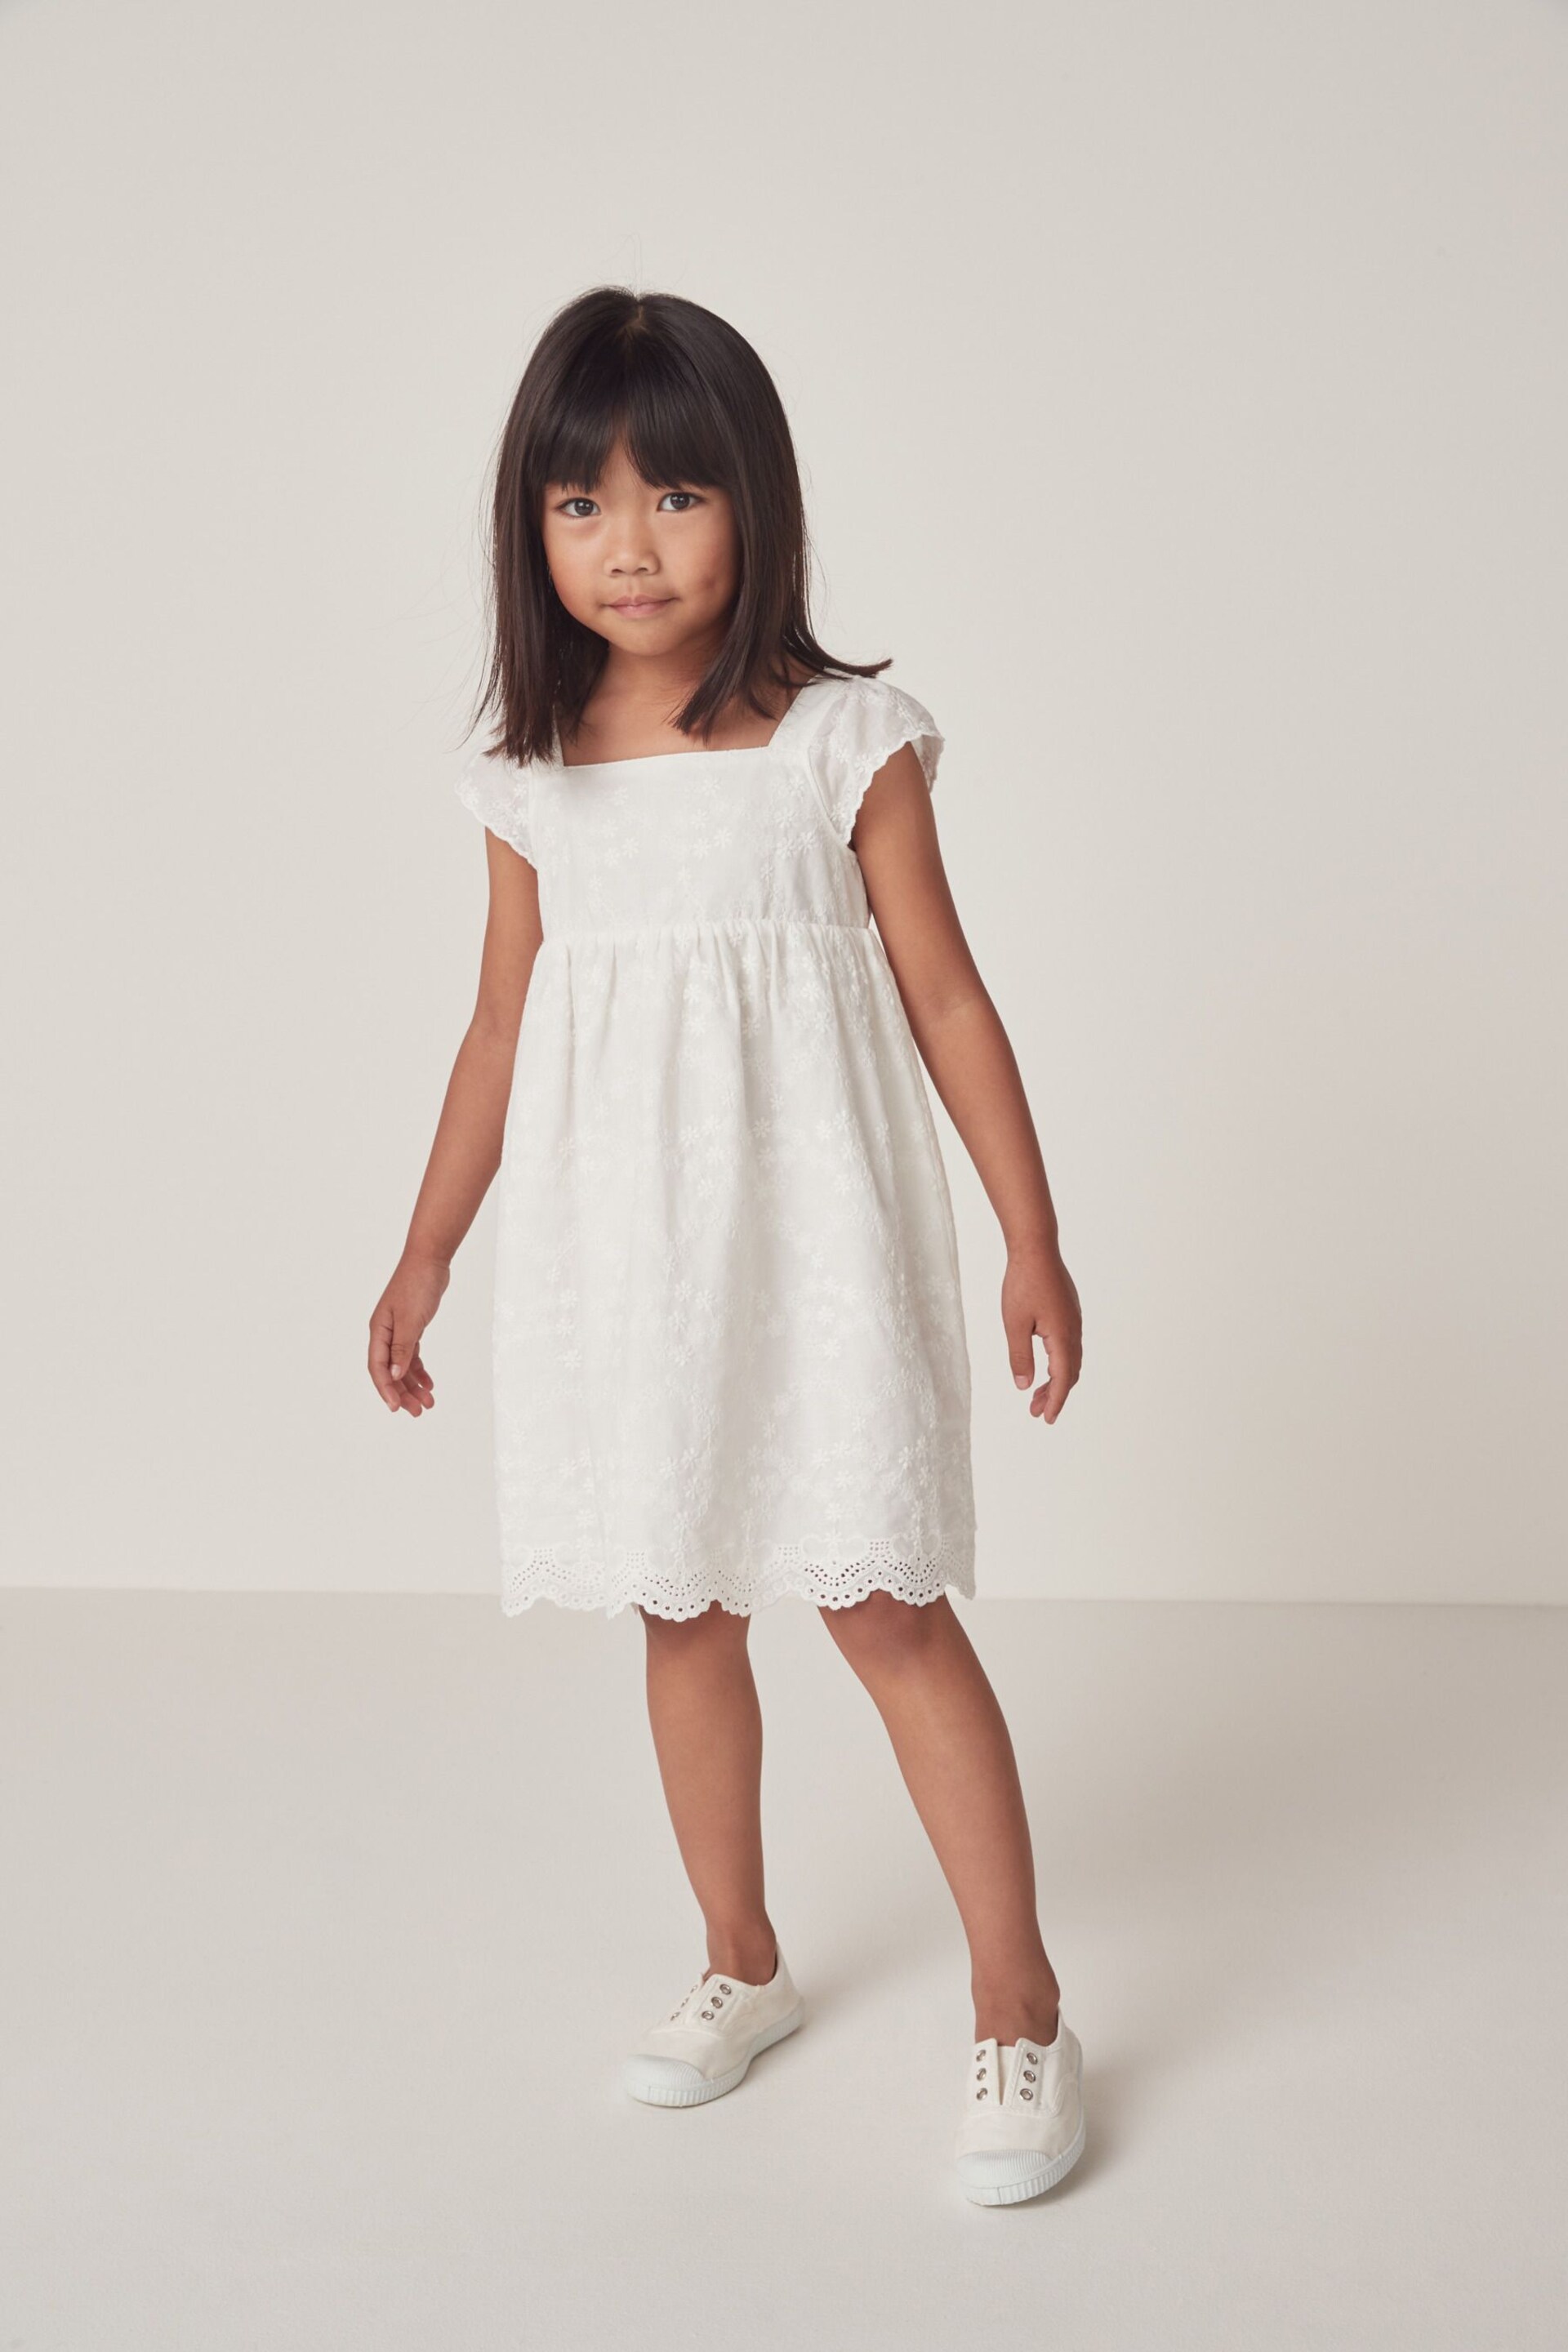 The White Company Cotton Broderie White Dress - Image 1 of 12